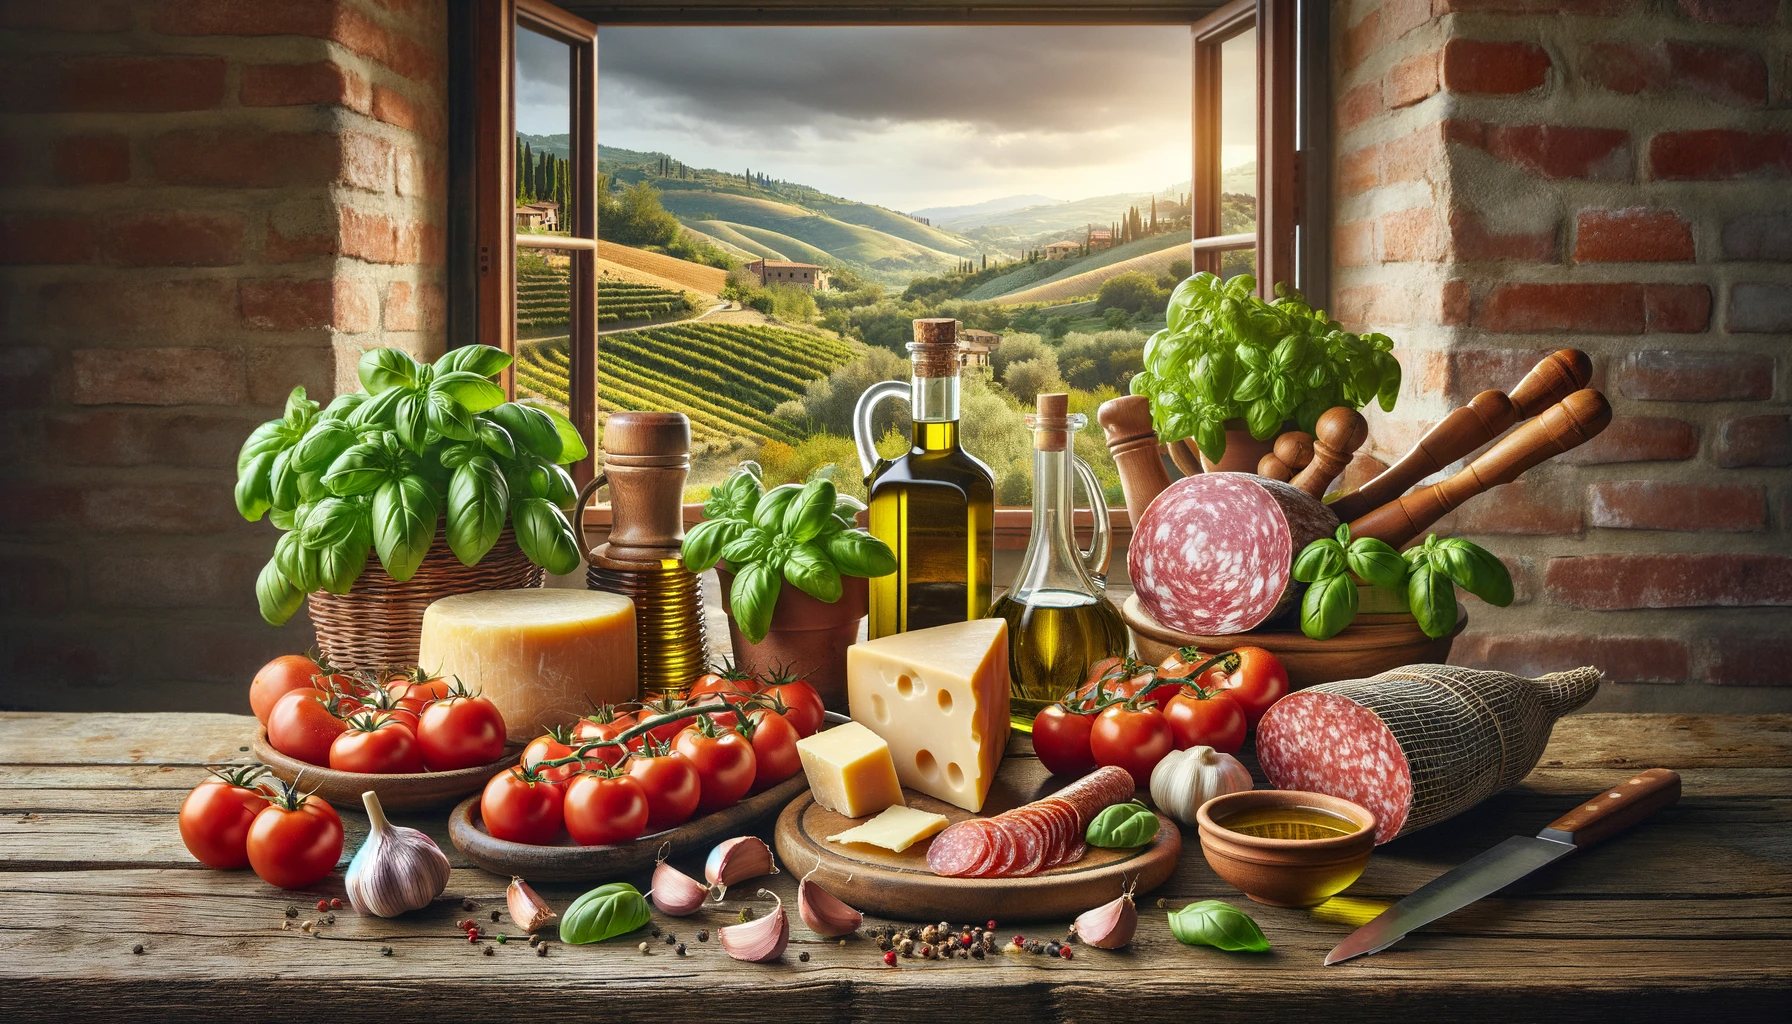 A variety of Italian cuisine ingredients are spread out on a rustic wooden table, including fresh basil leaves, ripe tomatoes, garlic cloves, a wheel of Parmesan cheese, olive oil, and cured meats like prosciutto and salami. The scene is set in a traditional Italian kitchen with terracotta tiles and wooden beams, and a window in the background offers a picturesque view of an Italian landscape with rolling hills and a vineyard. The image embodies the warmth and authenticity of Italian cooking